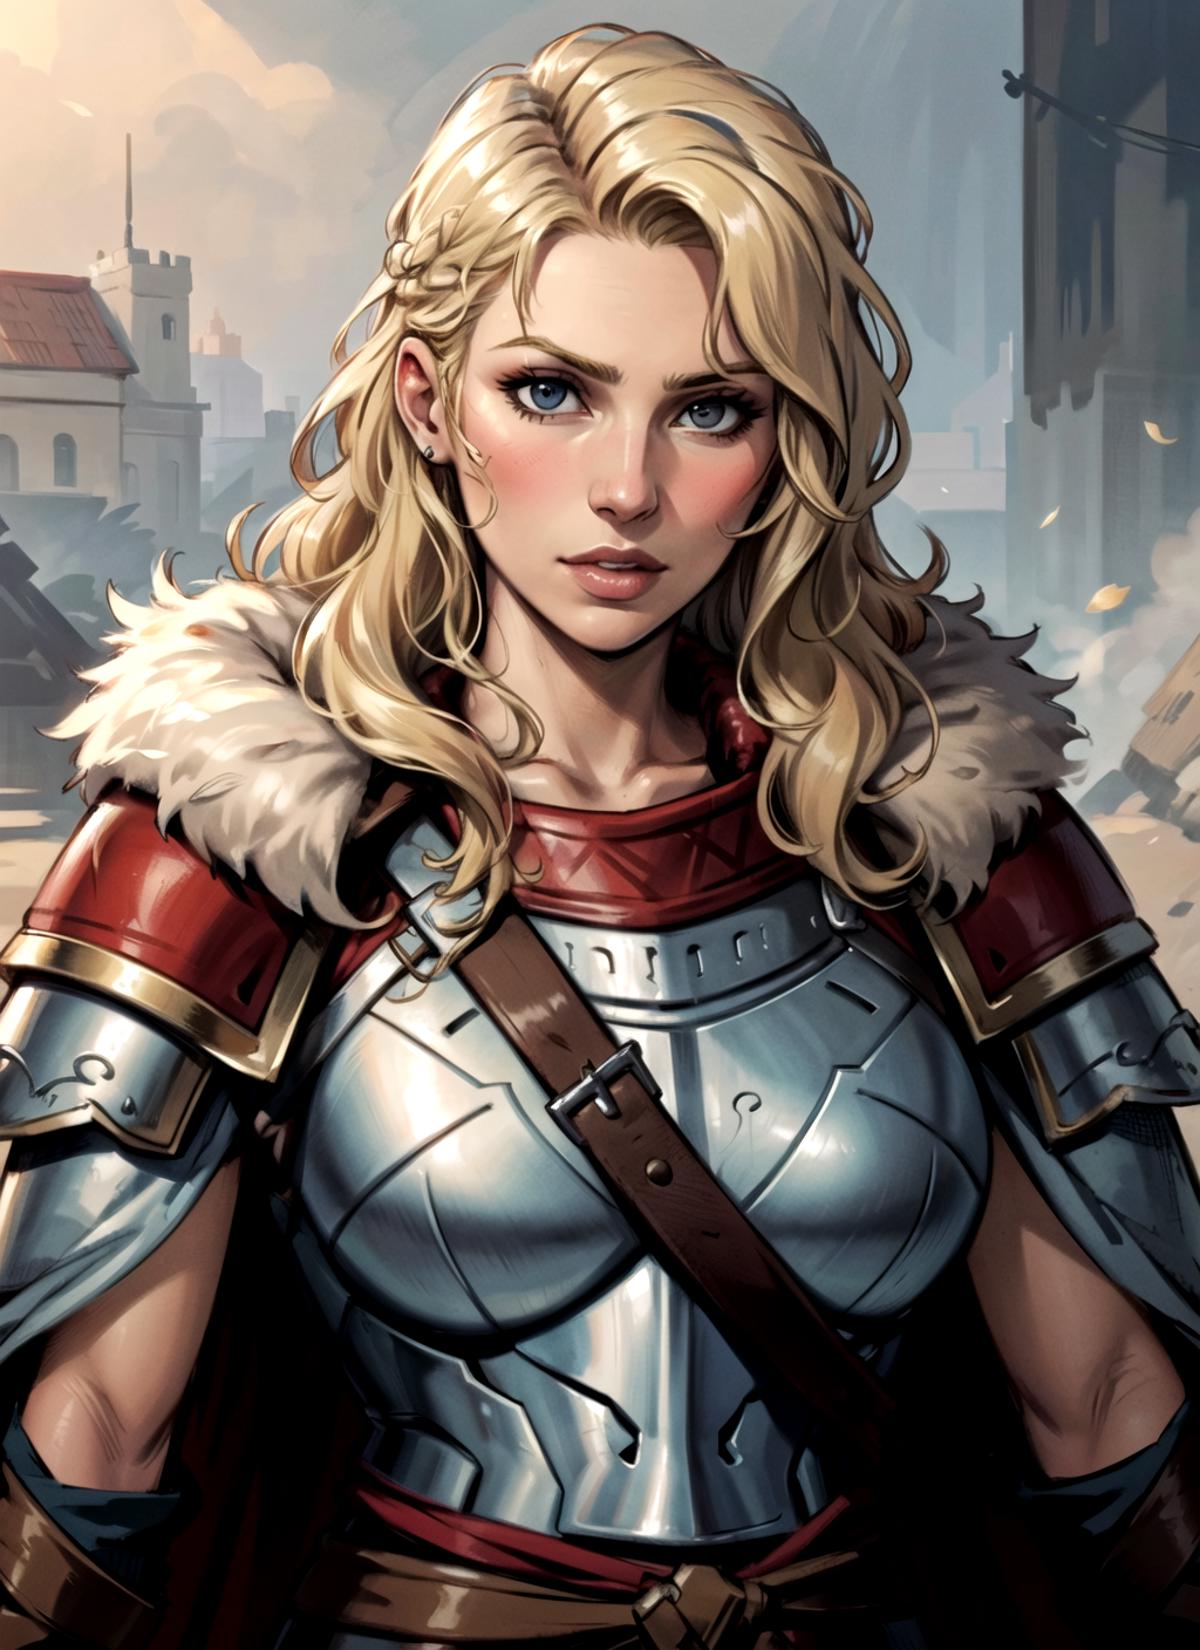 A beautiful blonde woman wearing a medieval armor and holding a sword.